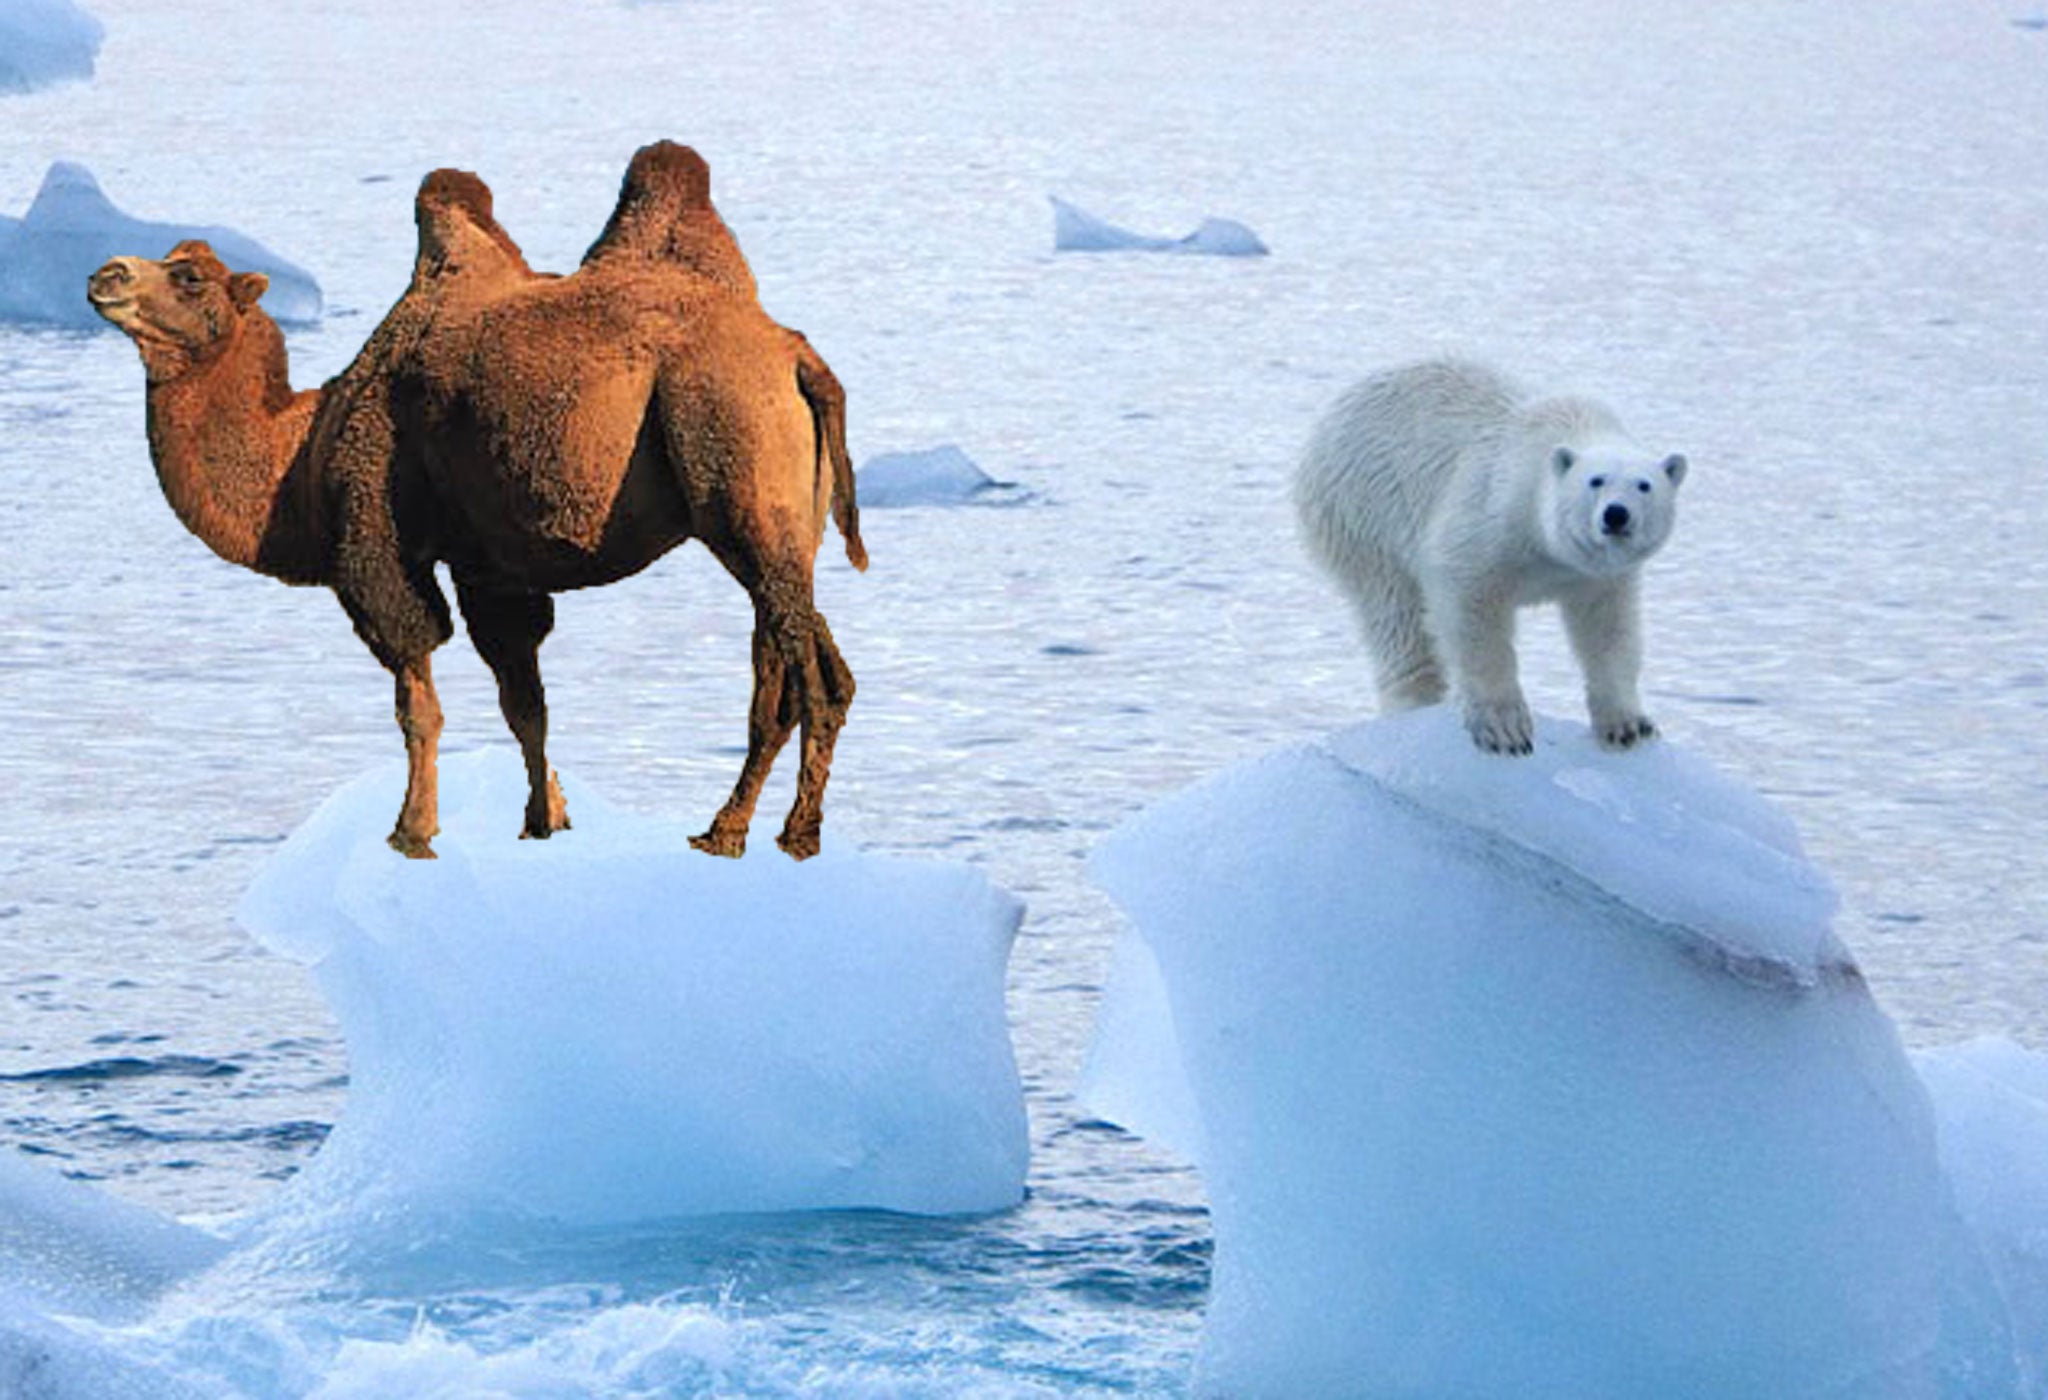 This camel doesn't believe in global warming